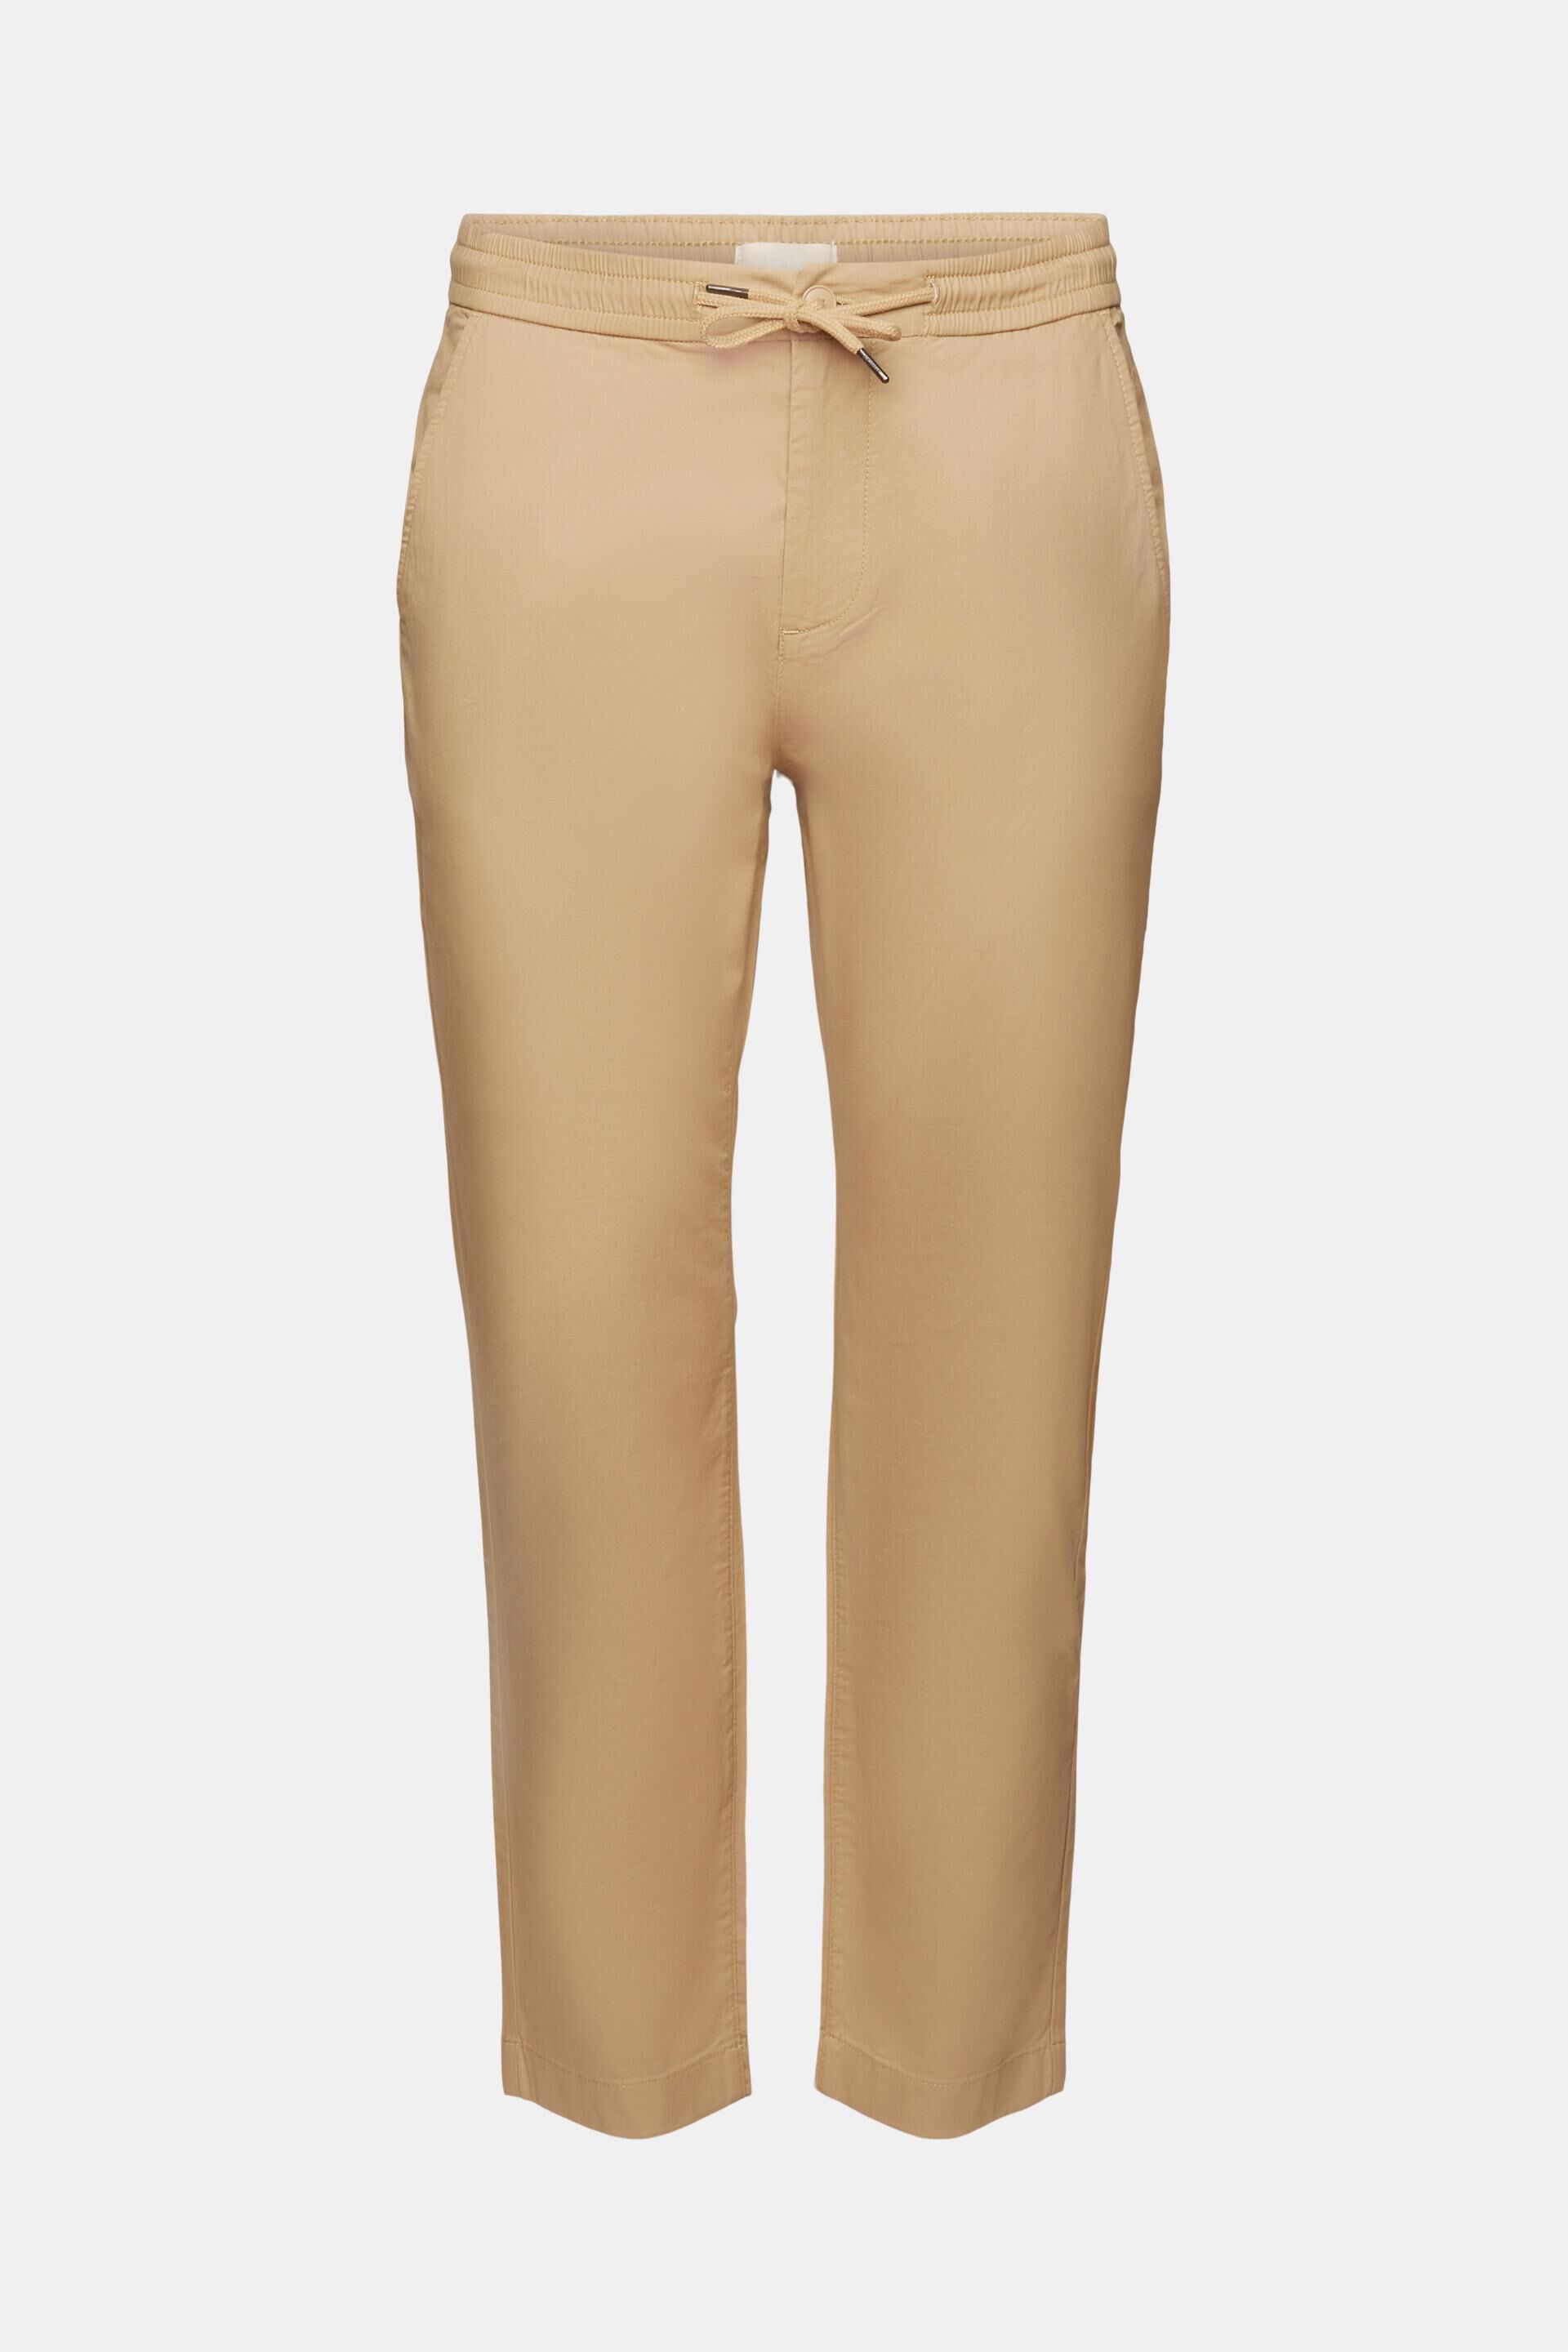 MINC - Buy Cargo Style Brushed Cotton Twill Trousers in Khaki Online